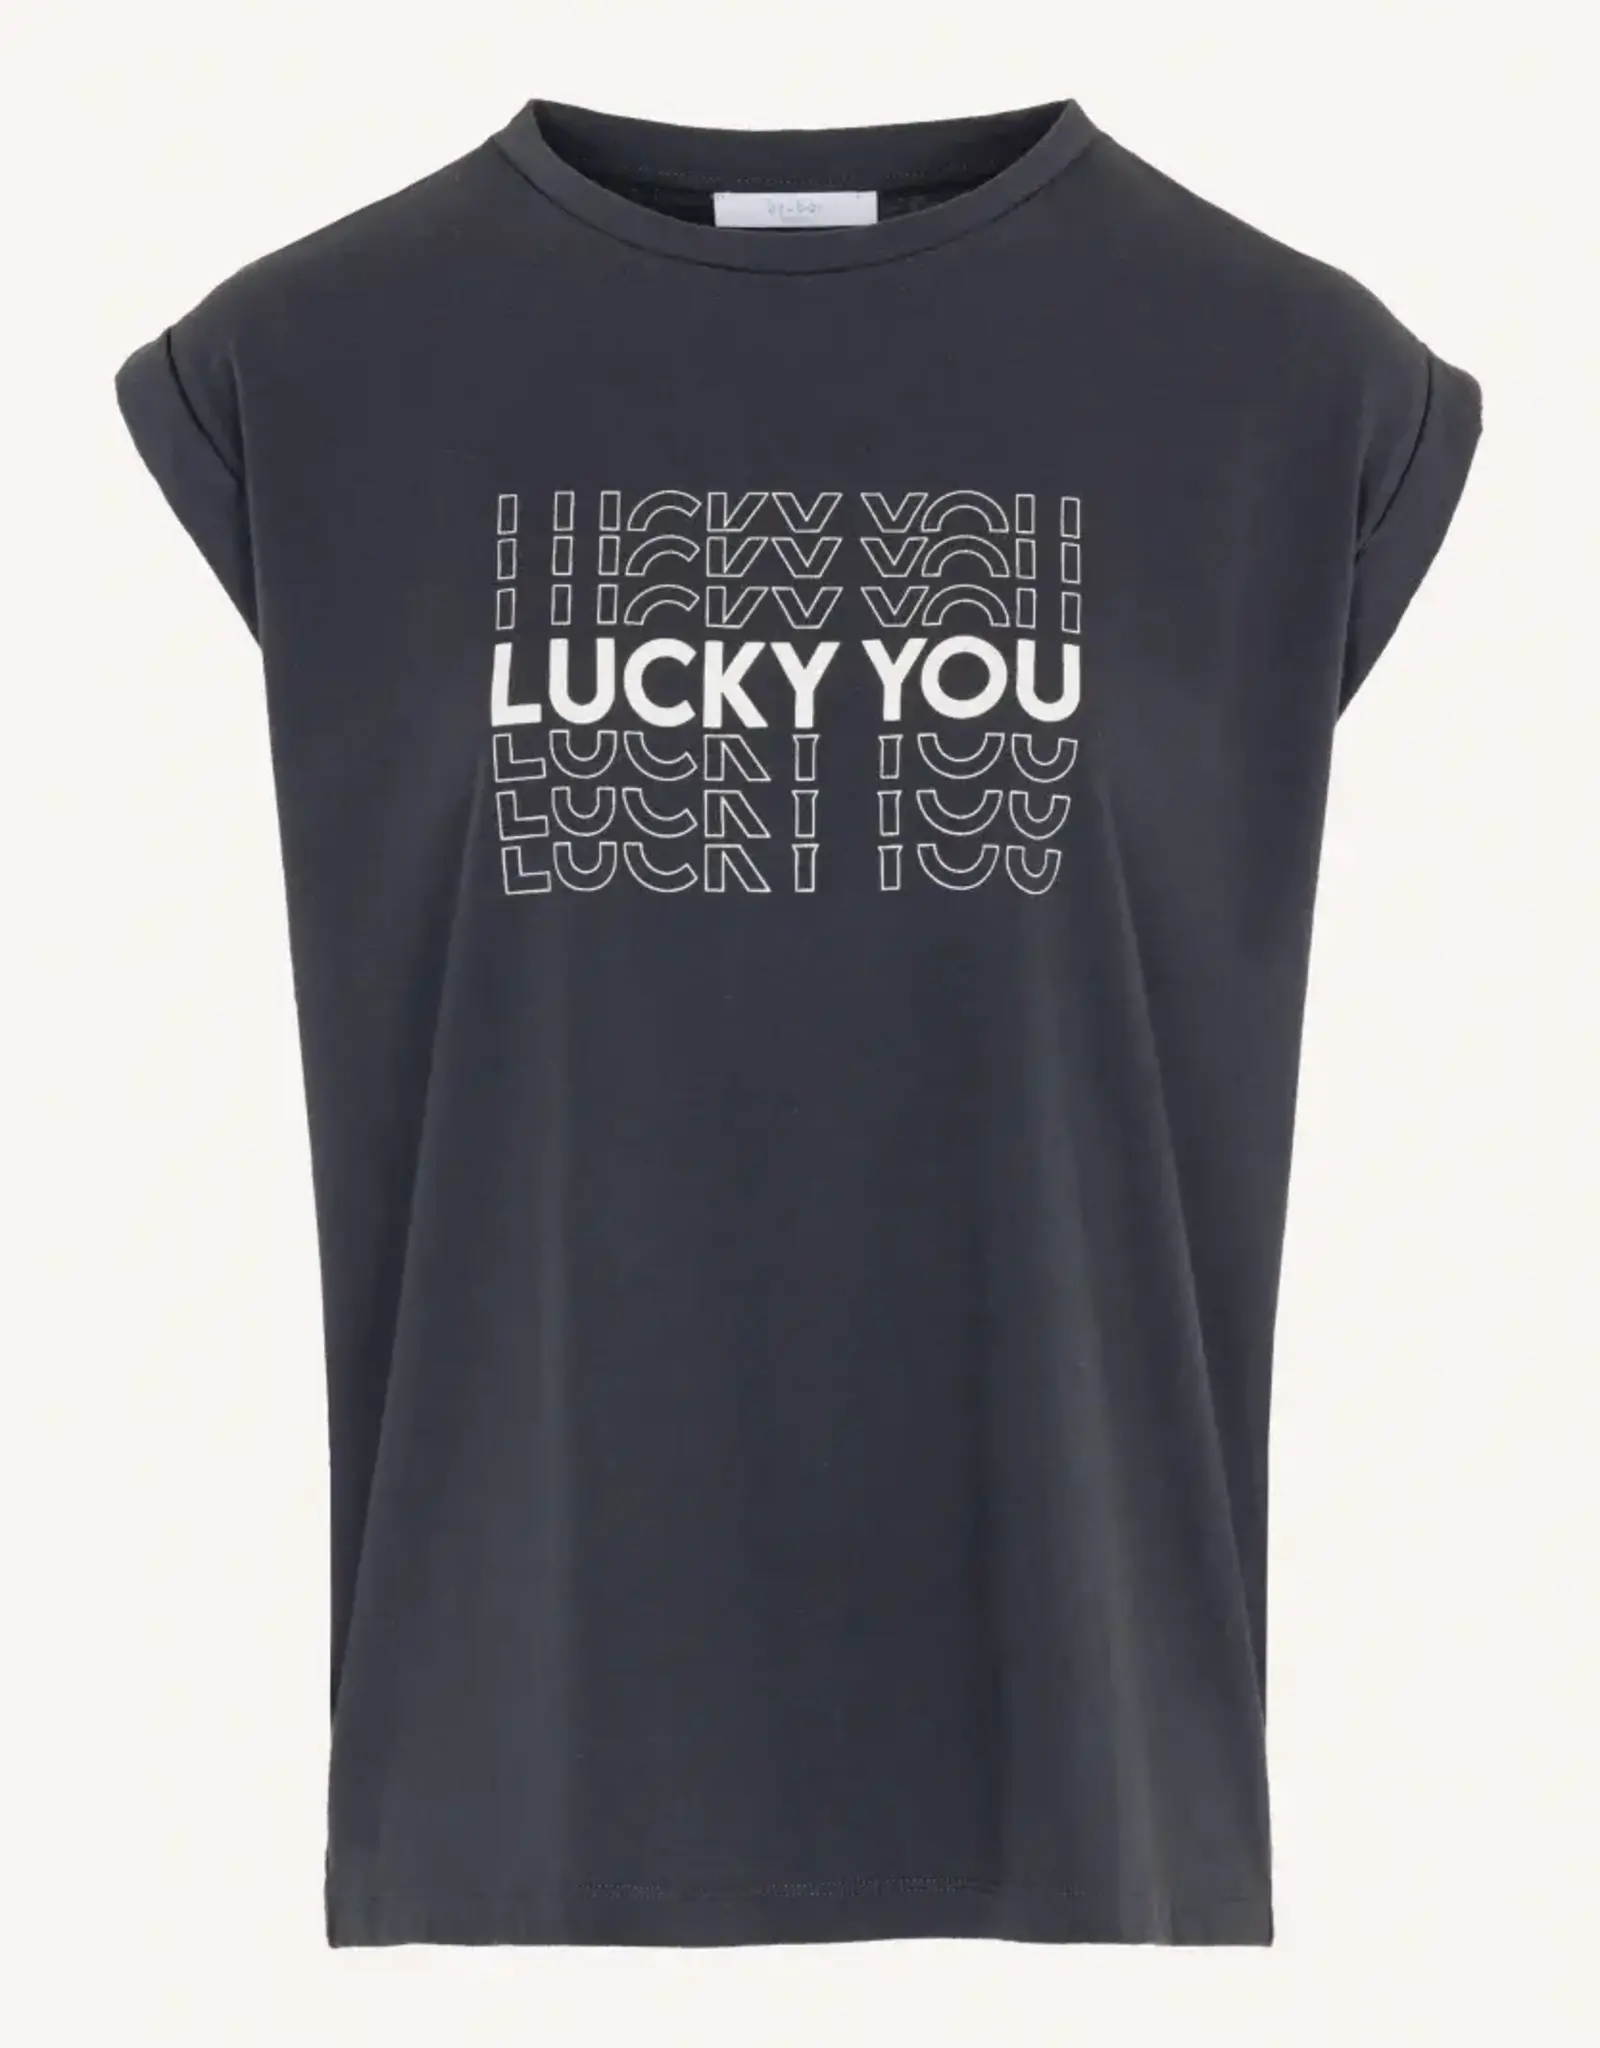 By Bar By Bar - T-Shirt Thelma Lucky you